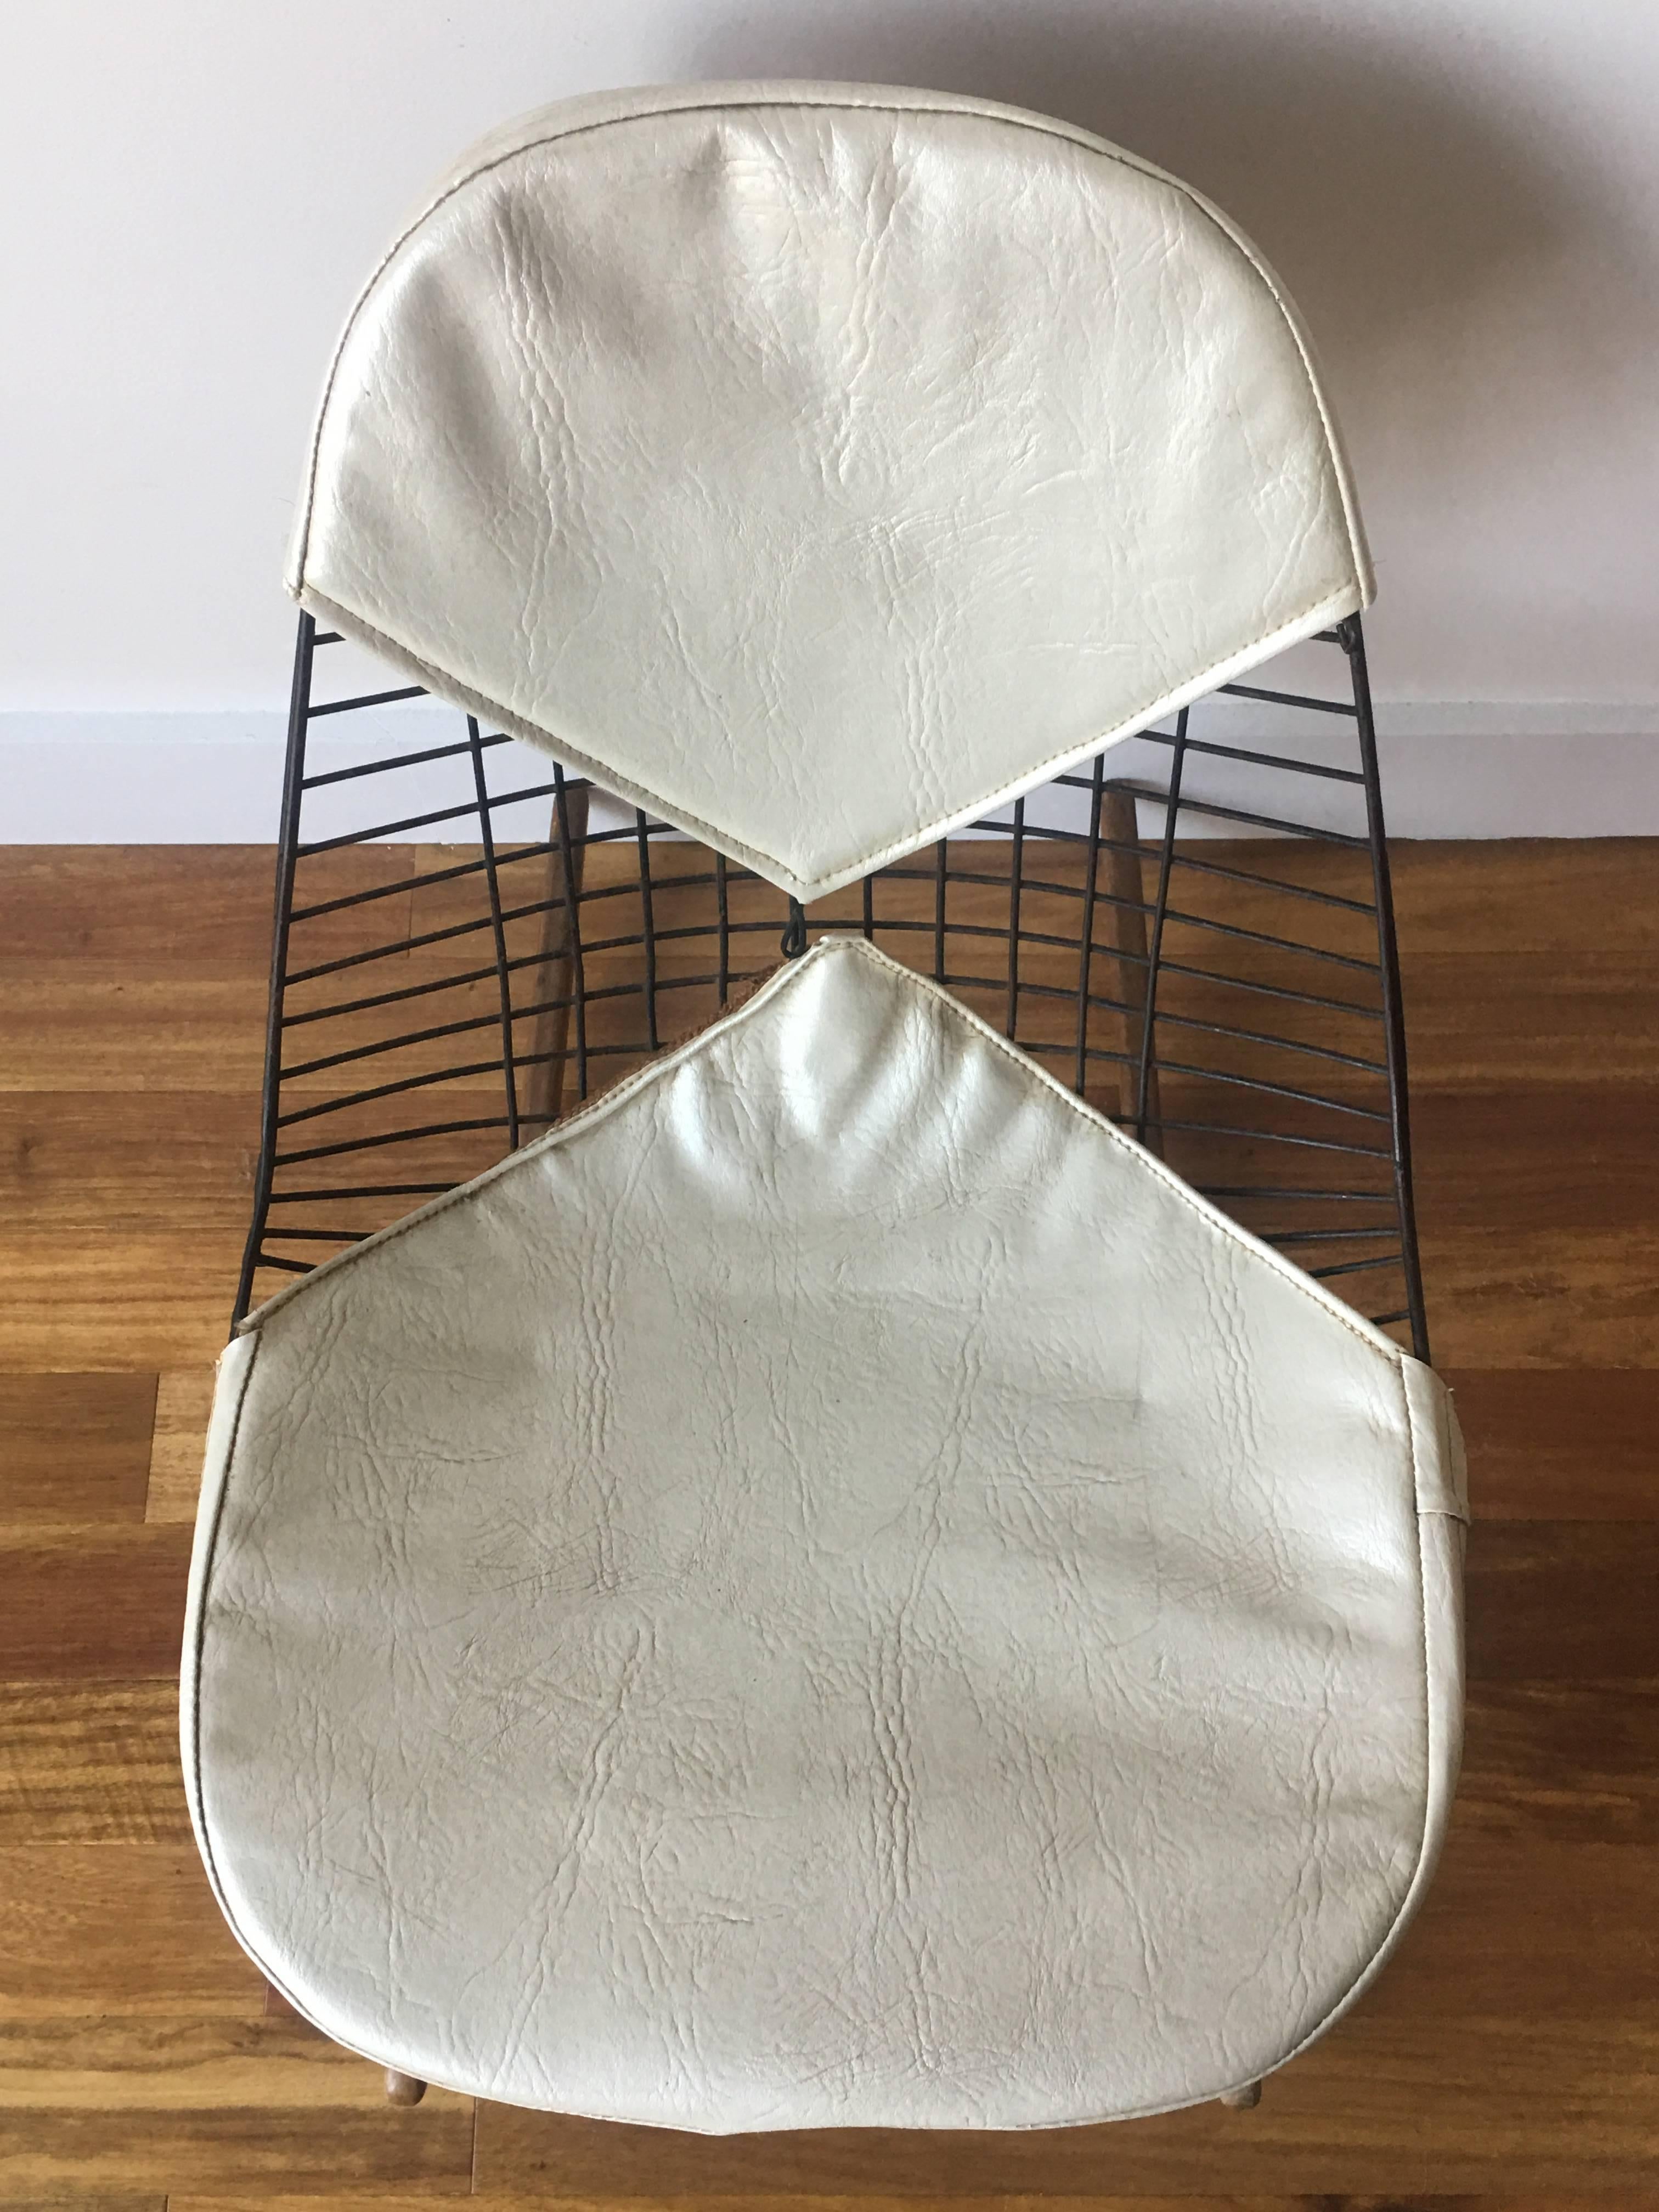 Early original Herman Miller Eames RKR. Original pads. Signed. Expert repair to side edge. Lighter spot on front left runner. Can be oiled at no charge. Hairline fissure to one runner but chair is sat in regularly.